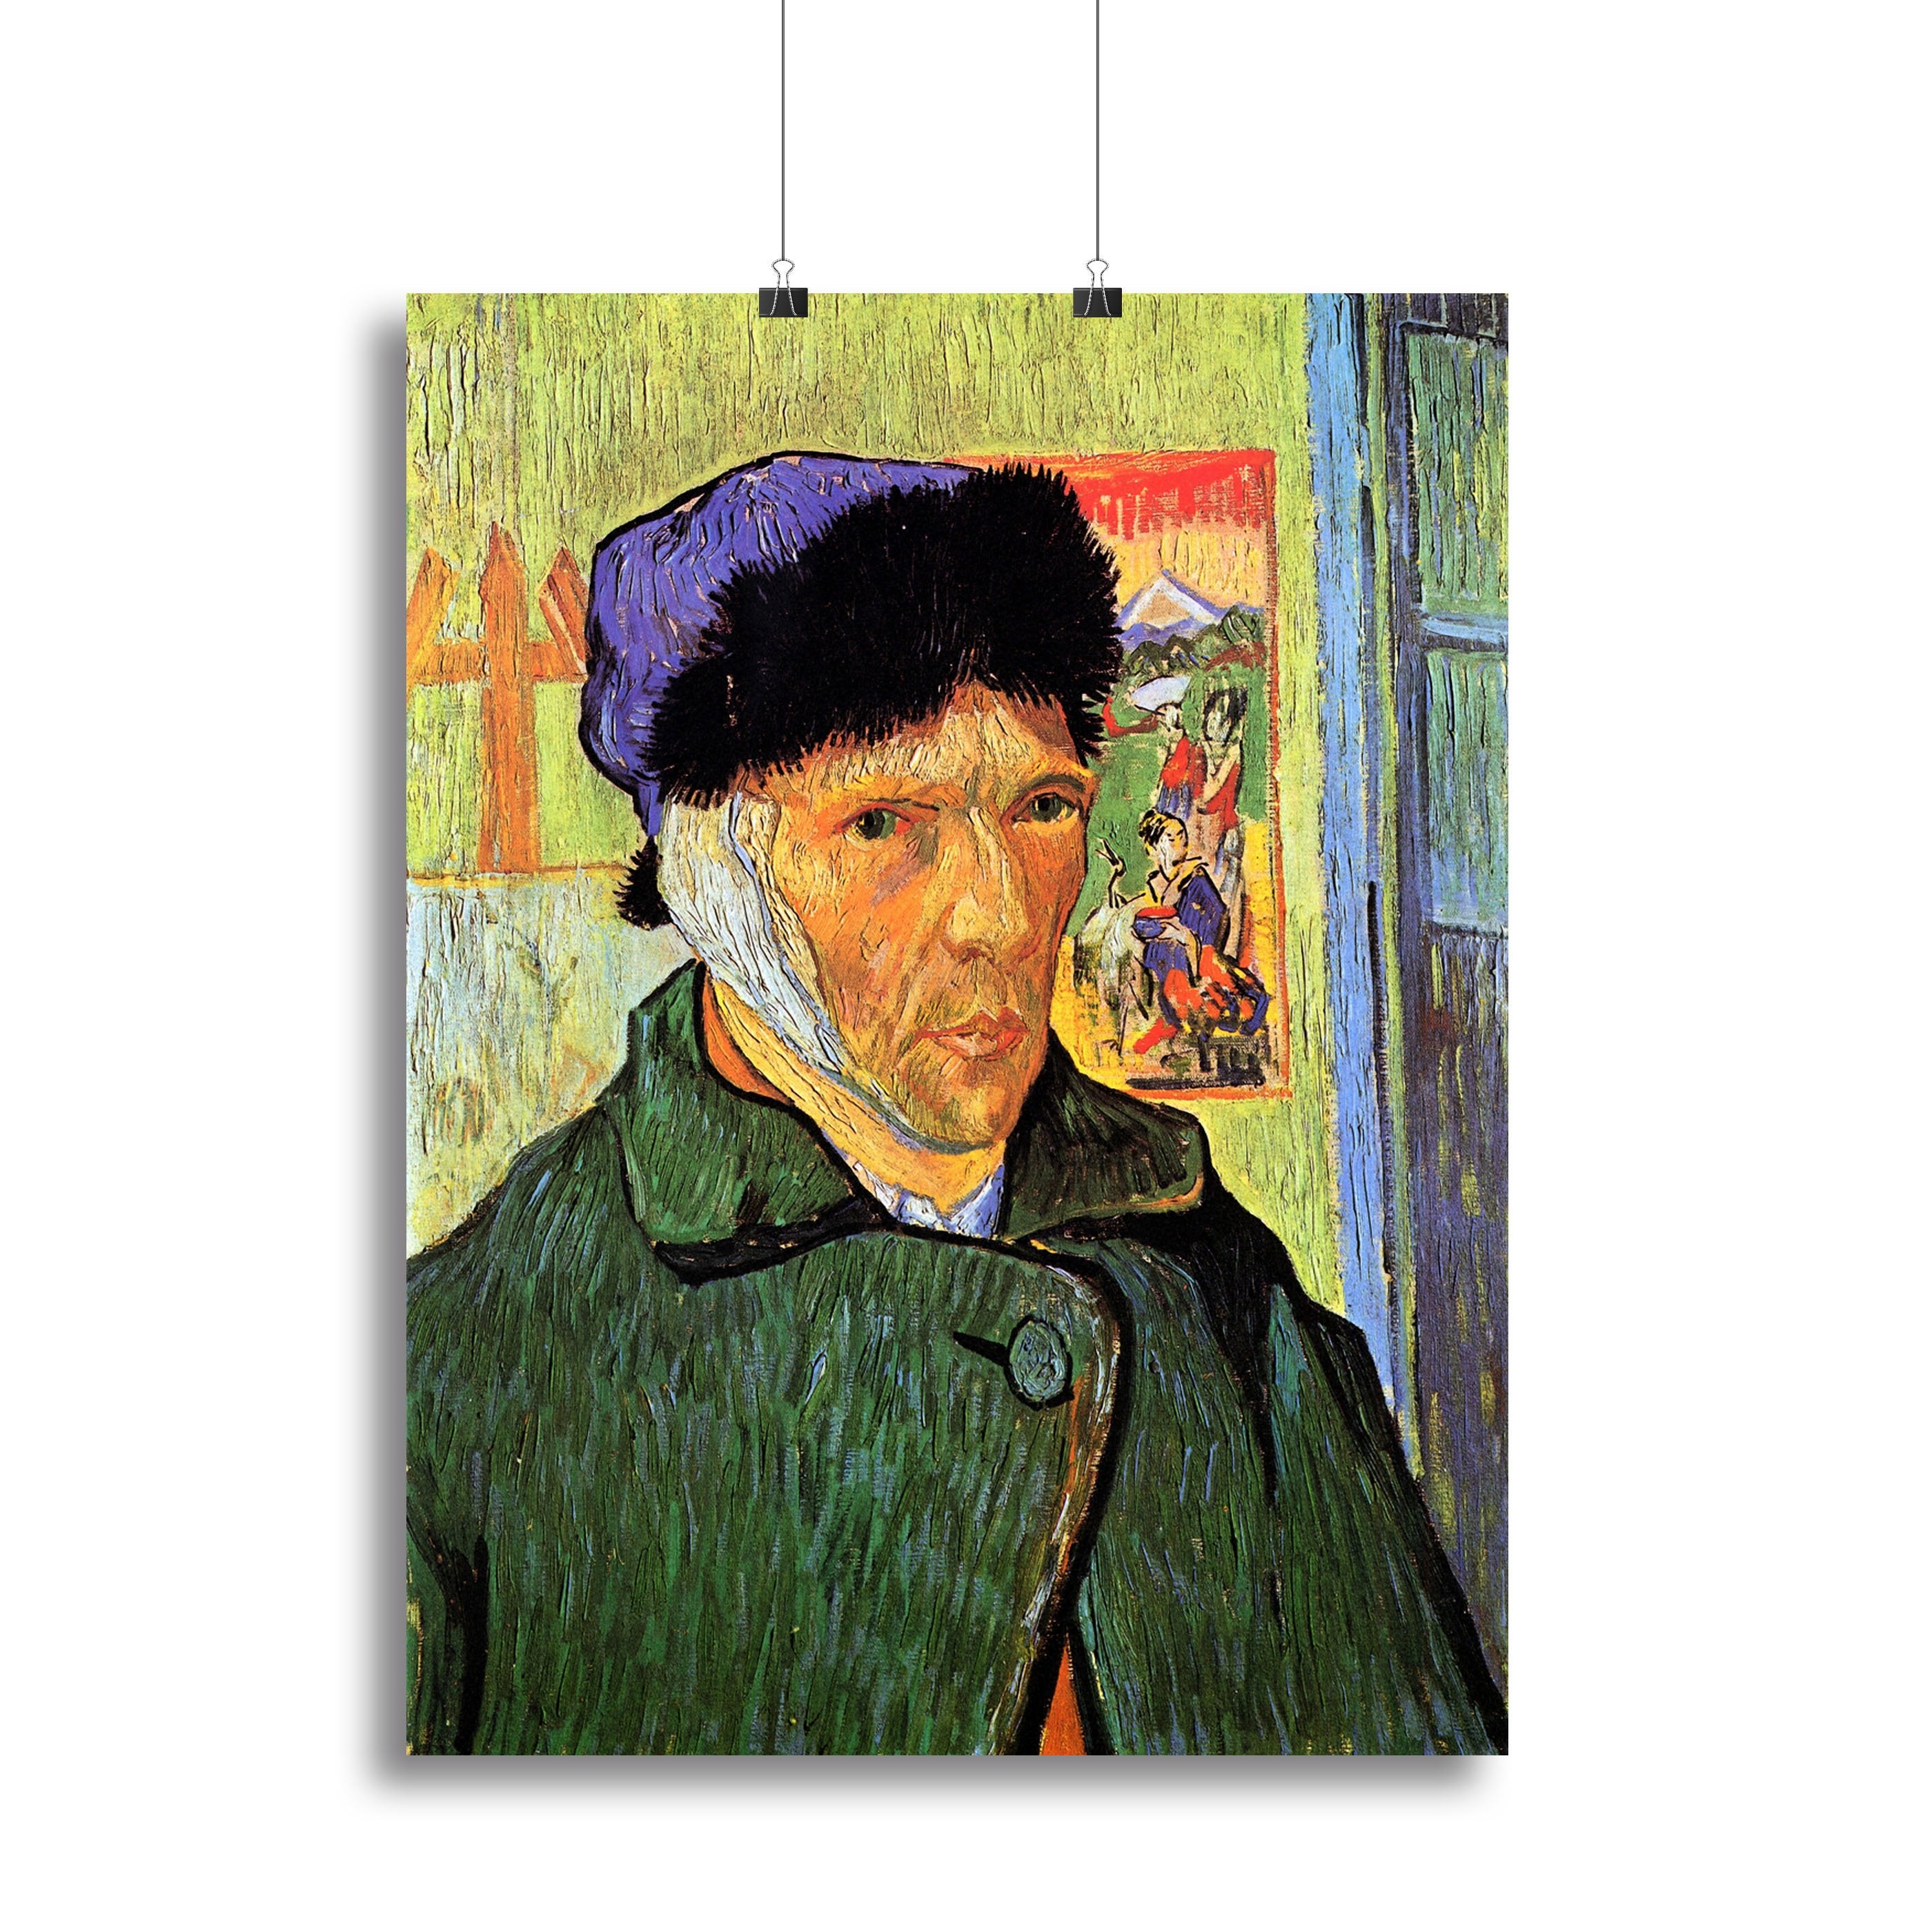 Self-Portrait 11 by Van Gogh Canvas Print or Poster